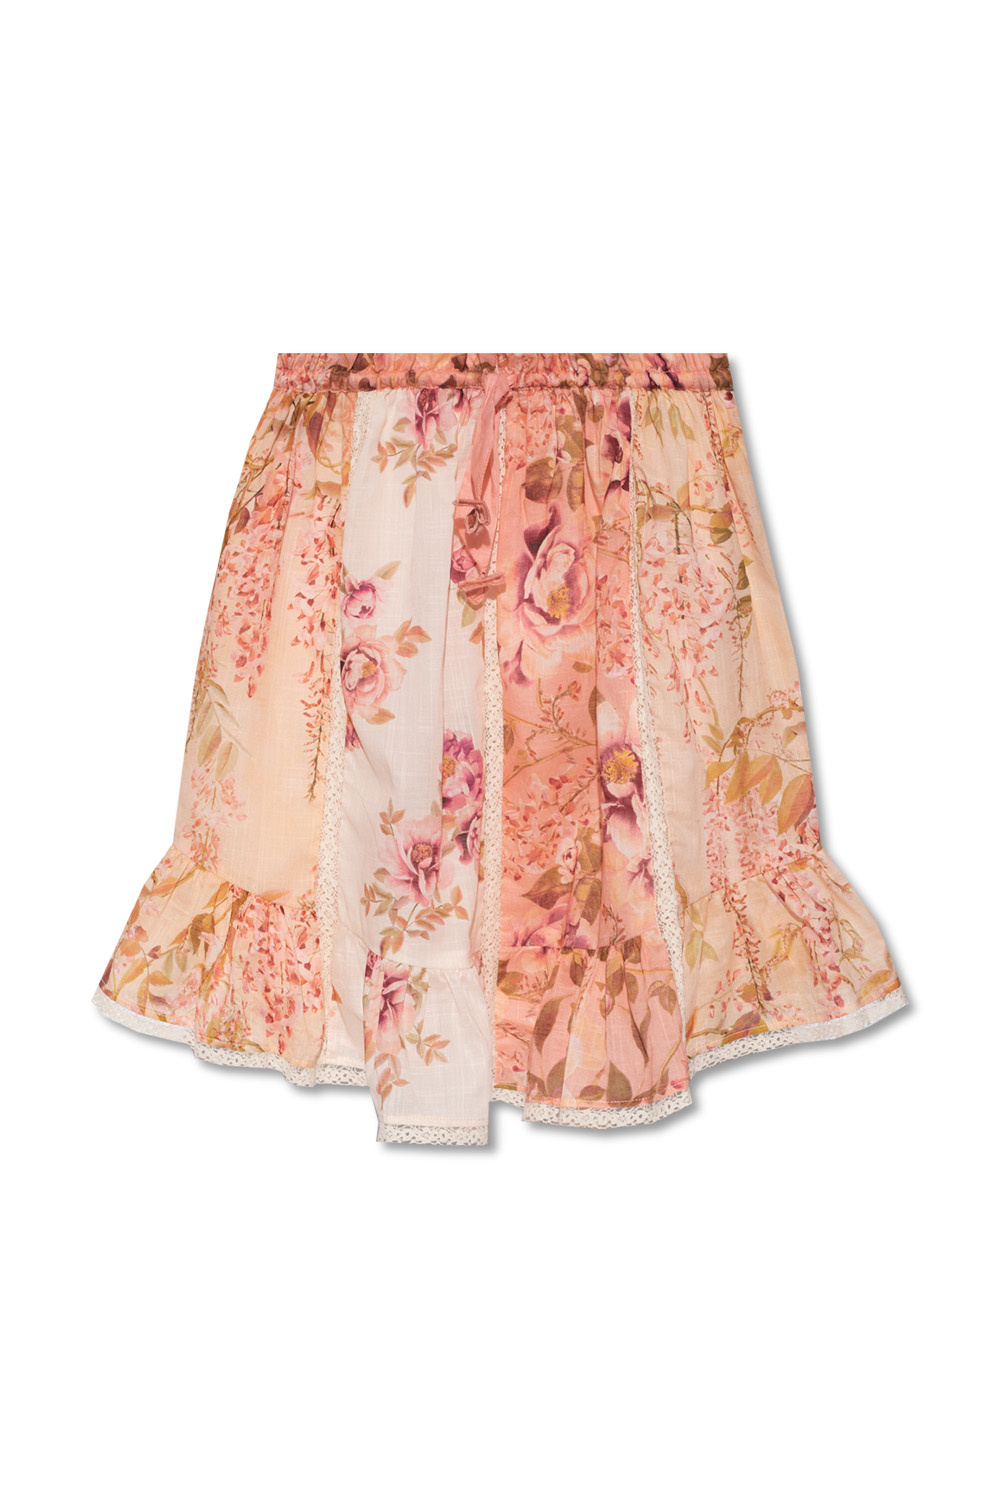 Zimmermann Kids Zimmermann Kids ZIMMERMANN KIDS SKIRT WITH FLORAL MOTIF KIDS